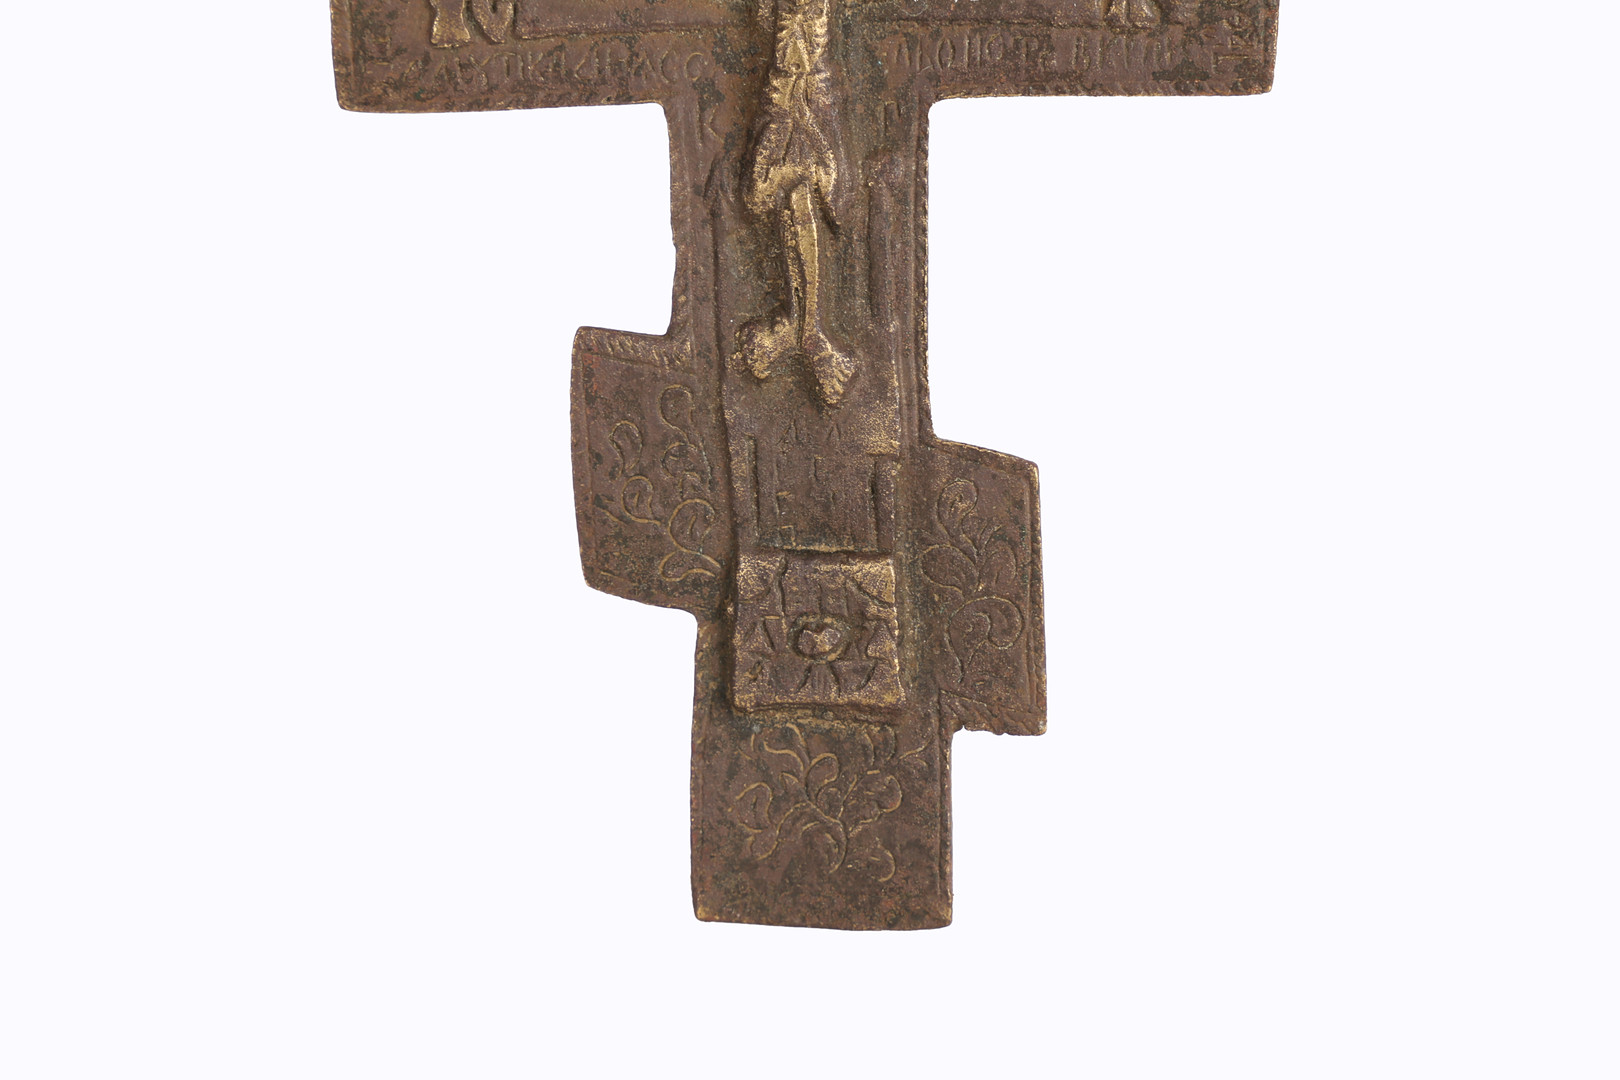 TWO 19TH CENTURY RUSSIAN ORTHODOX BRONZE ICONS. - Image 6 of 10